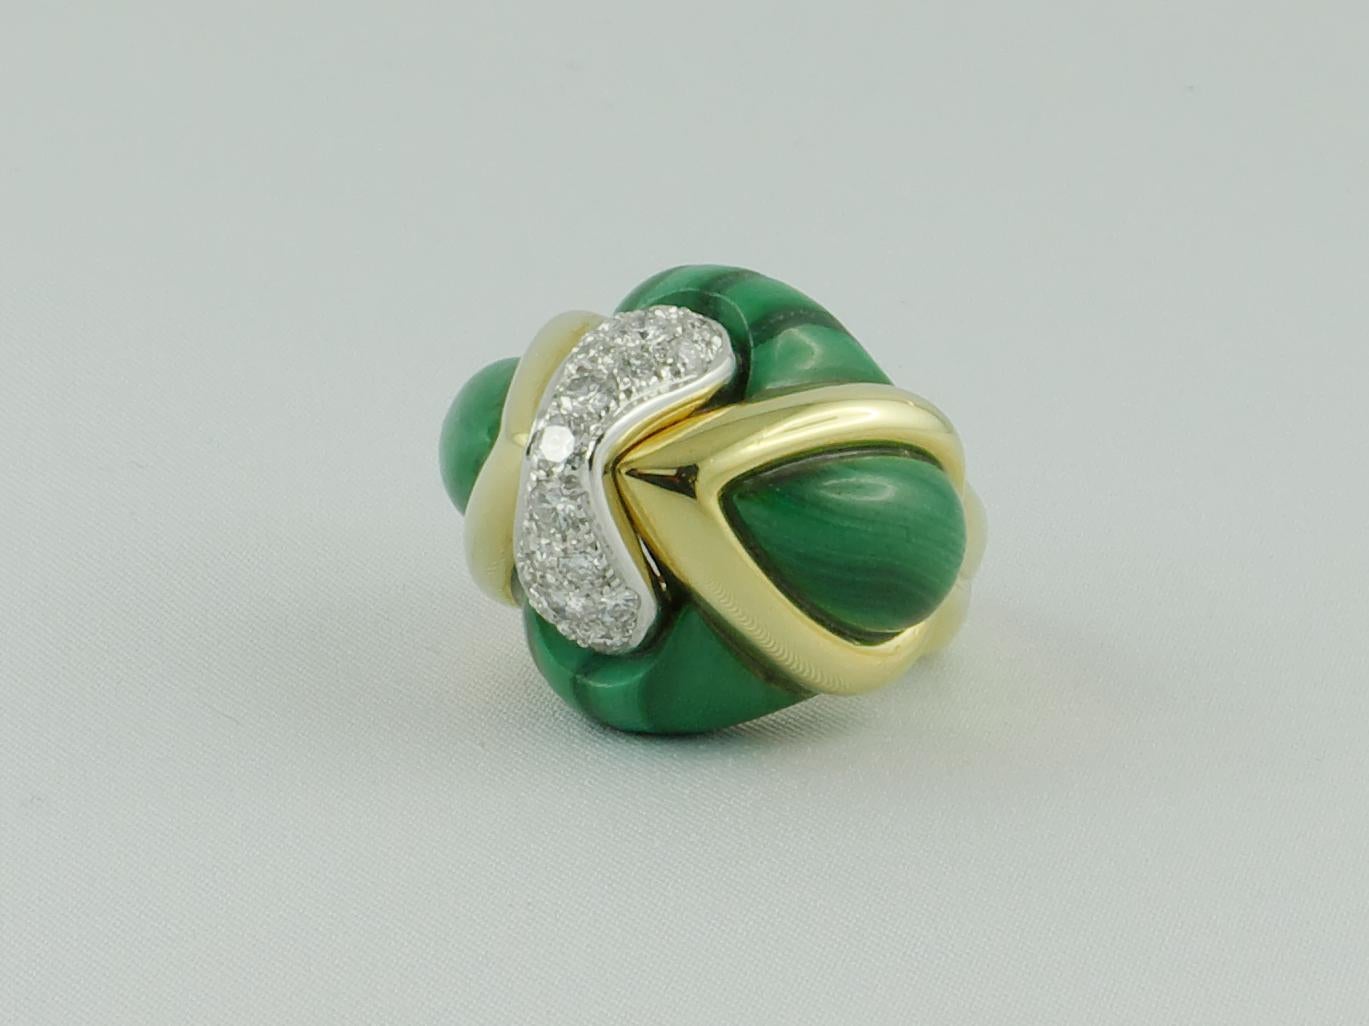 Unusual 1970s Italian Diamonds White and Yellow Gold dome Ring in Malachite shaping a textured pointed dome
The design is enhanced by a stroke of approx. 0.65 cts brilliant diamonds running through the center and set in 18 karat White Gold while the